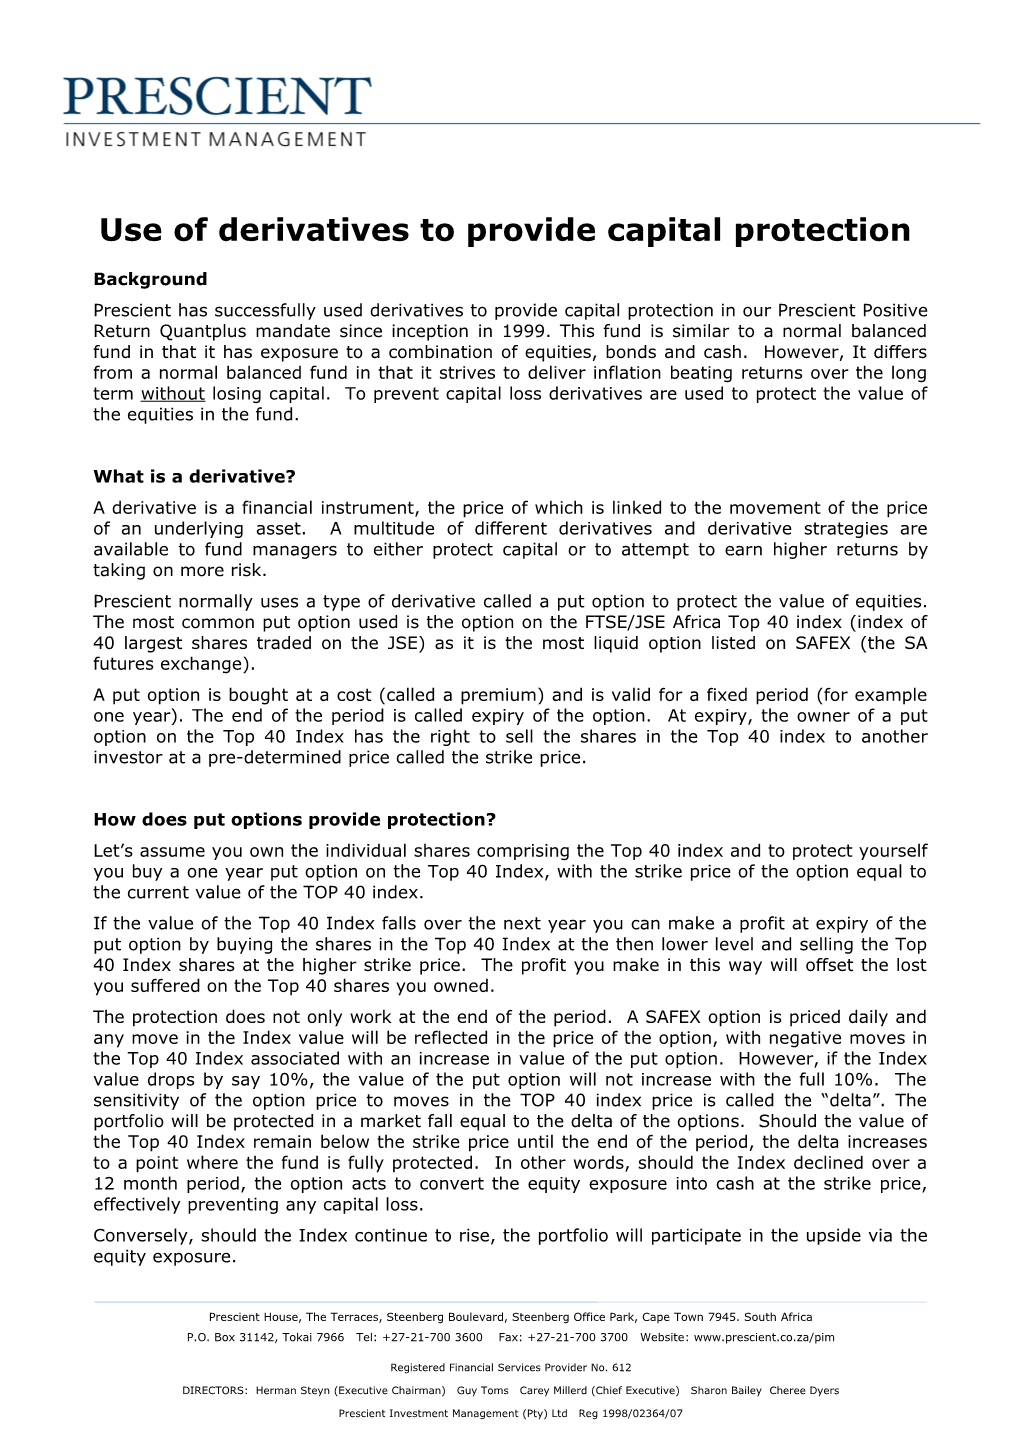 Use of Derivatives to Provide Capital Protection